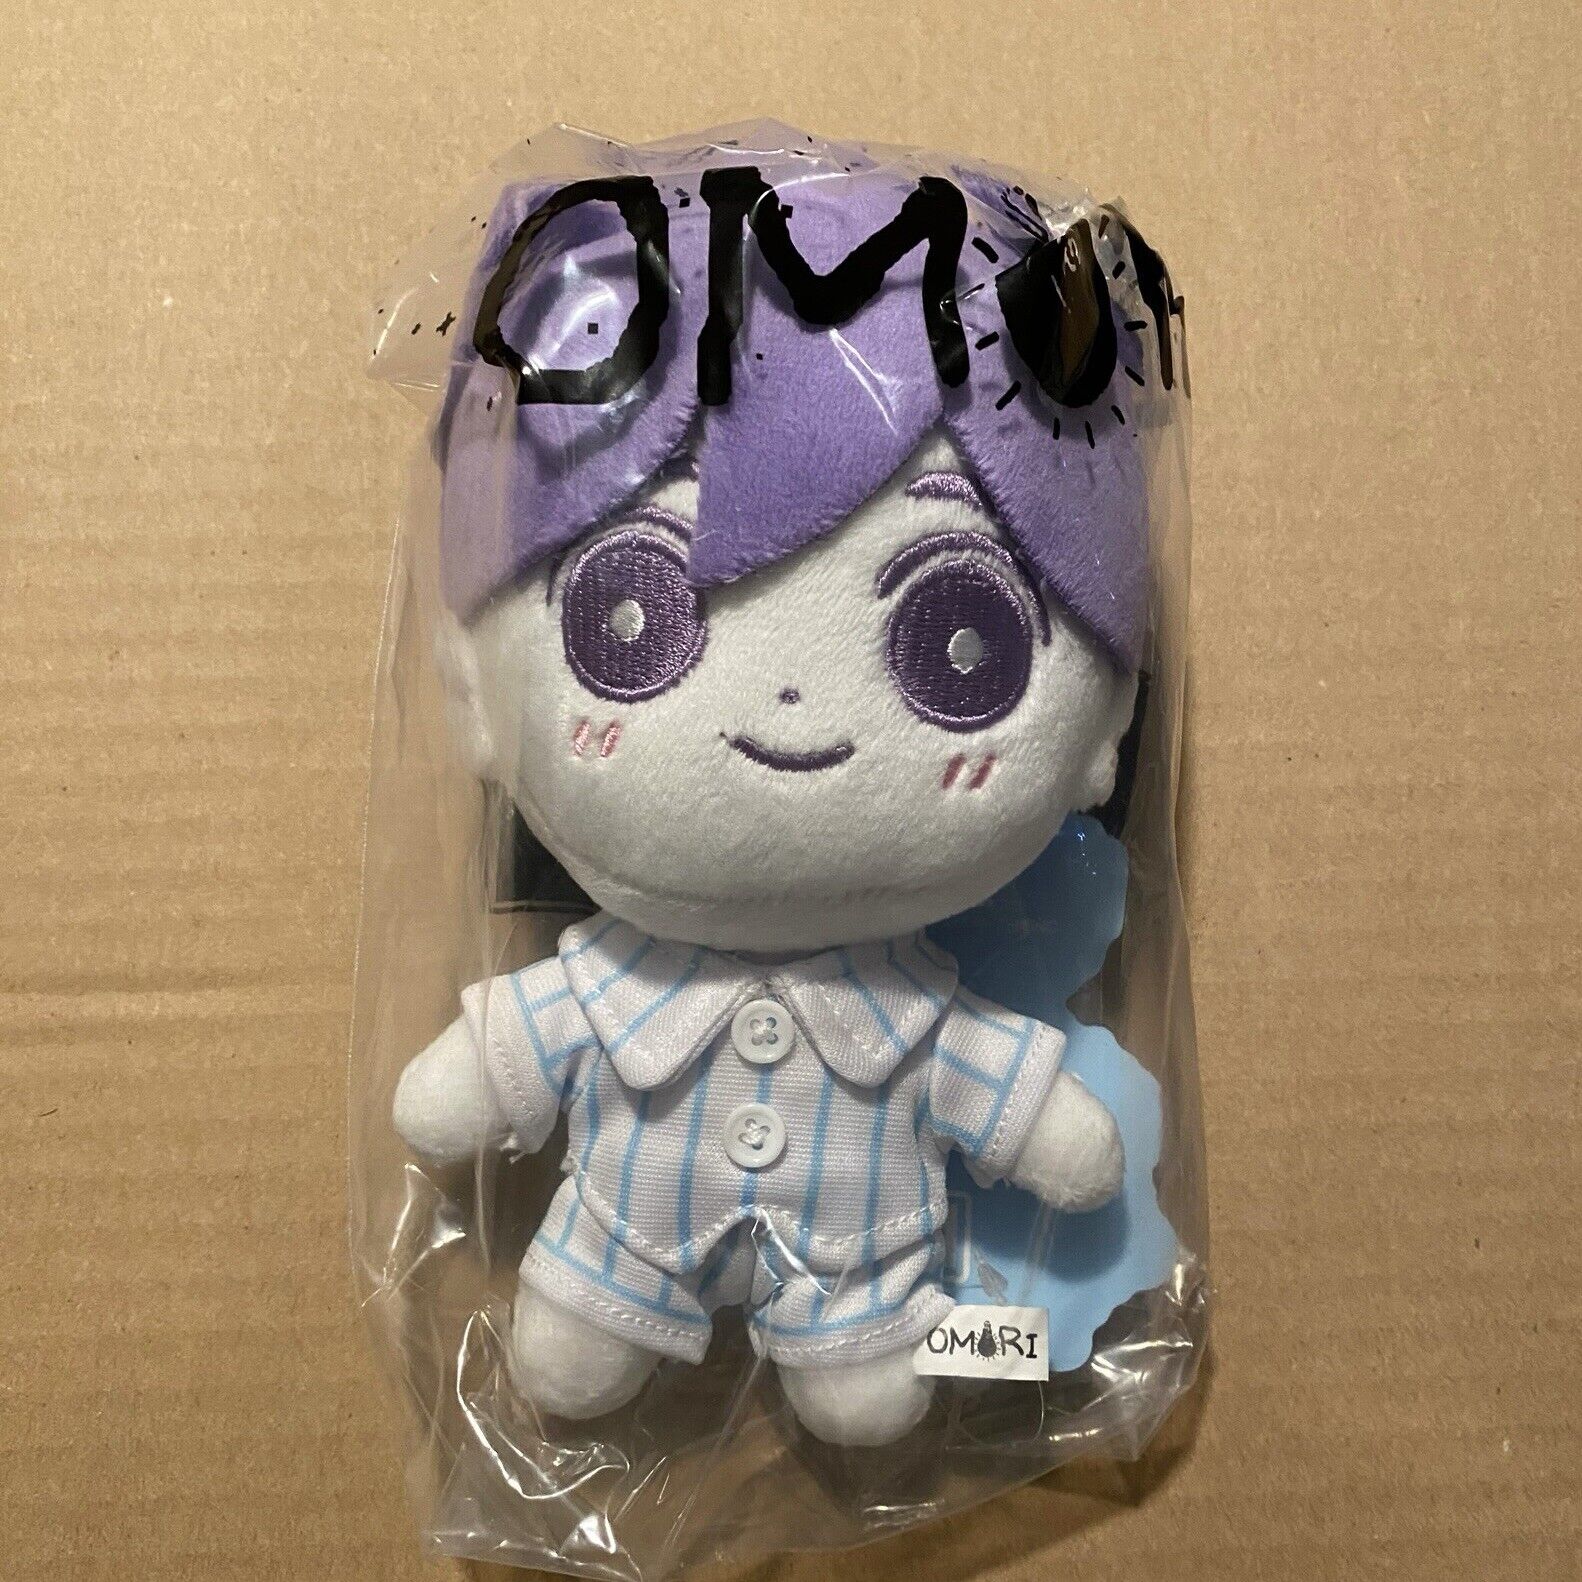 *IN HAND* Authentic Official OMOCAT Omori Hero Plush Doll Brand New Unopened